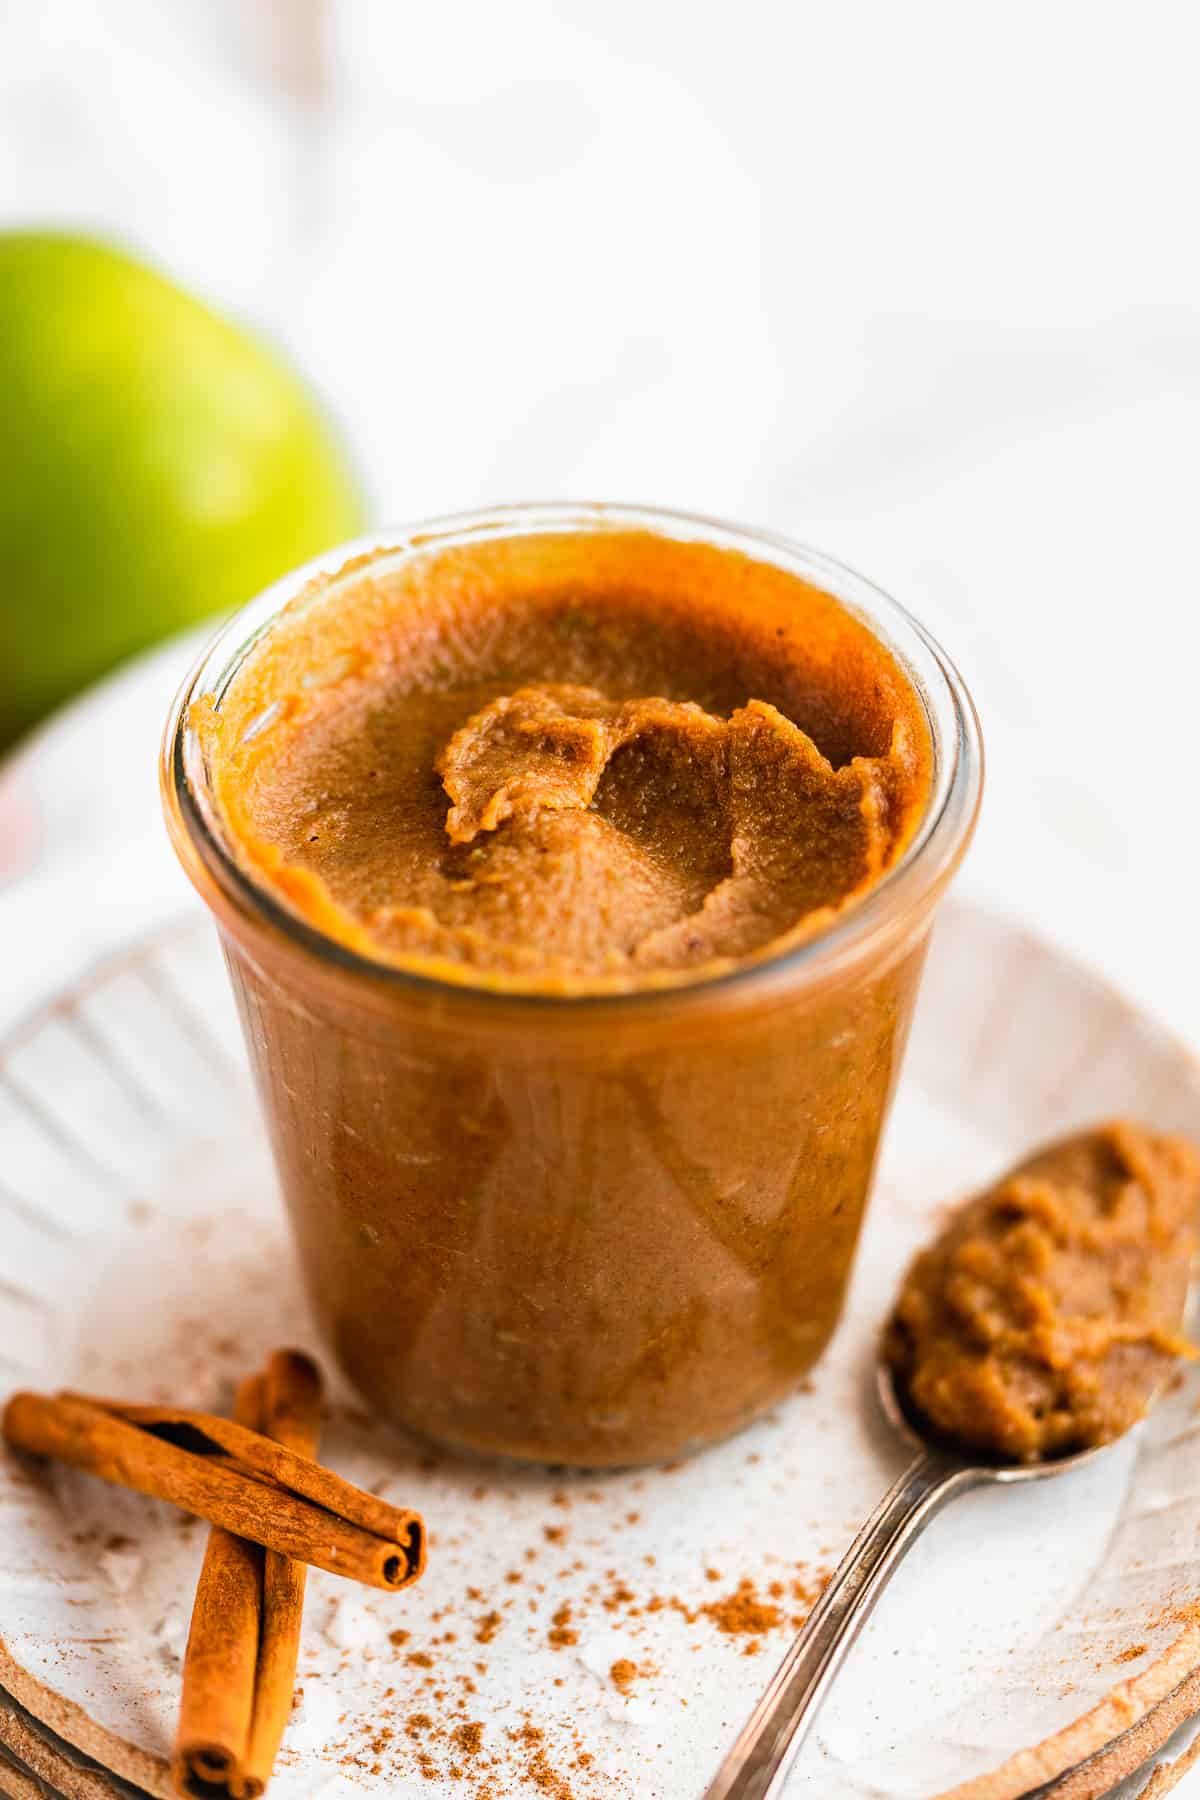 Clear jar sitting on a white plate and  filled to the top with Easy Salted Caramel Apple Butter.  A spoon with a scoop of Apple Butter is resting on the plate.  